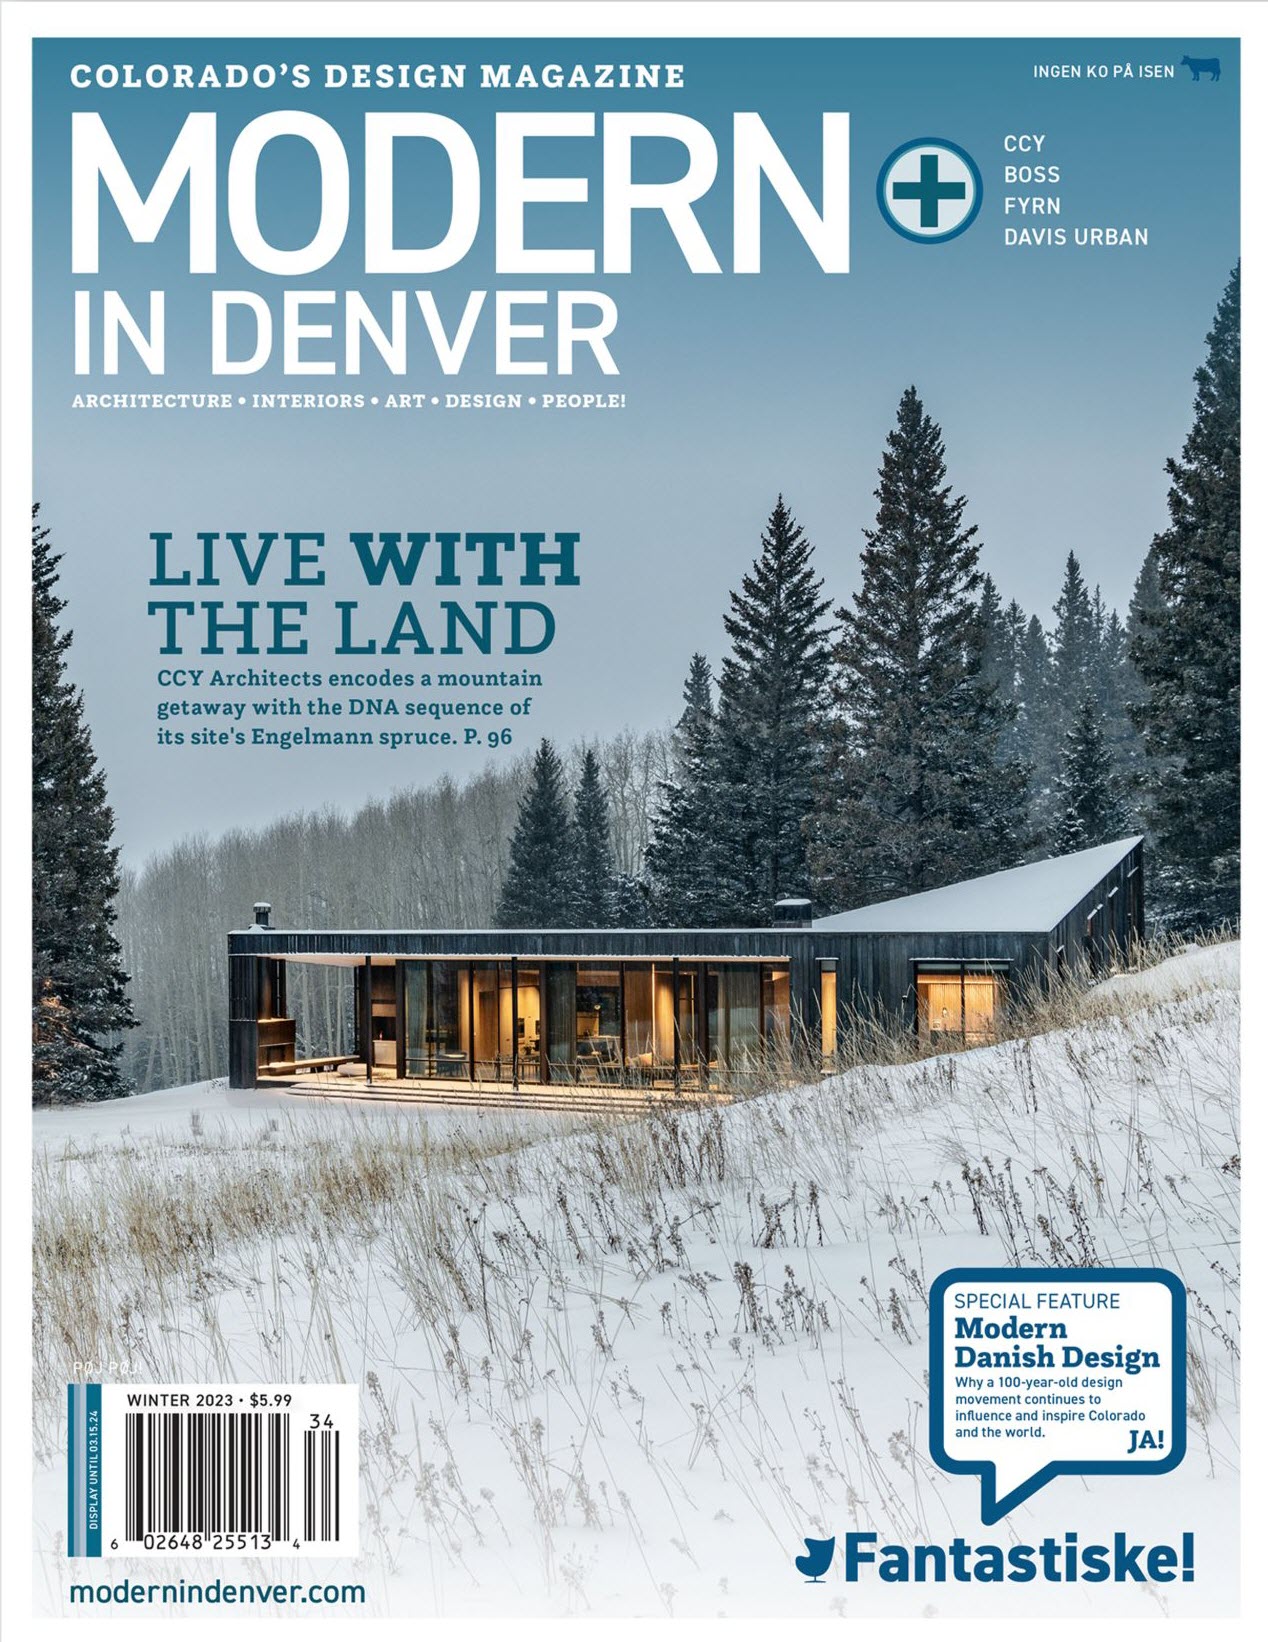 modern in devnver magazine switched to SimpleCirc